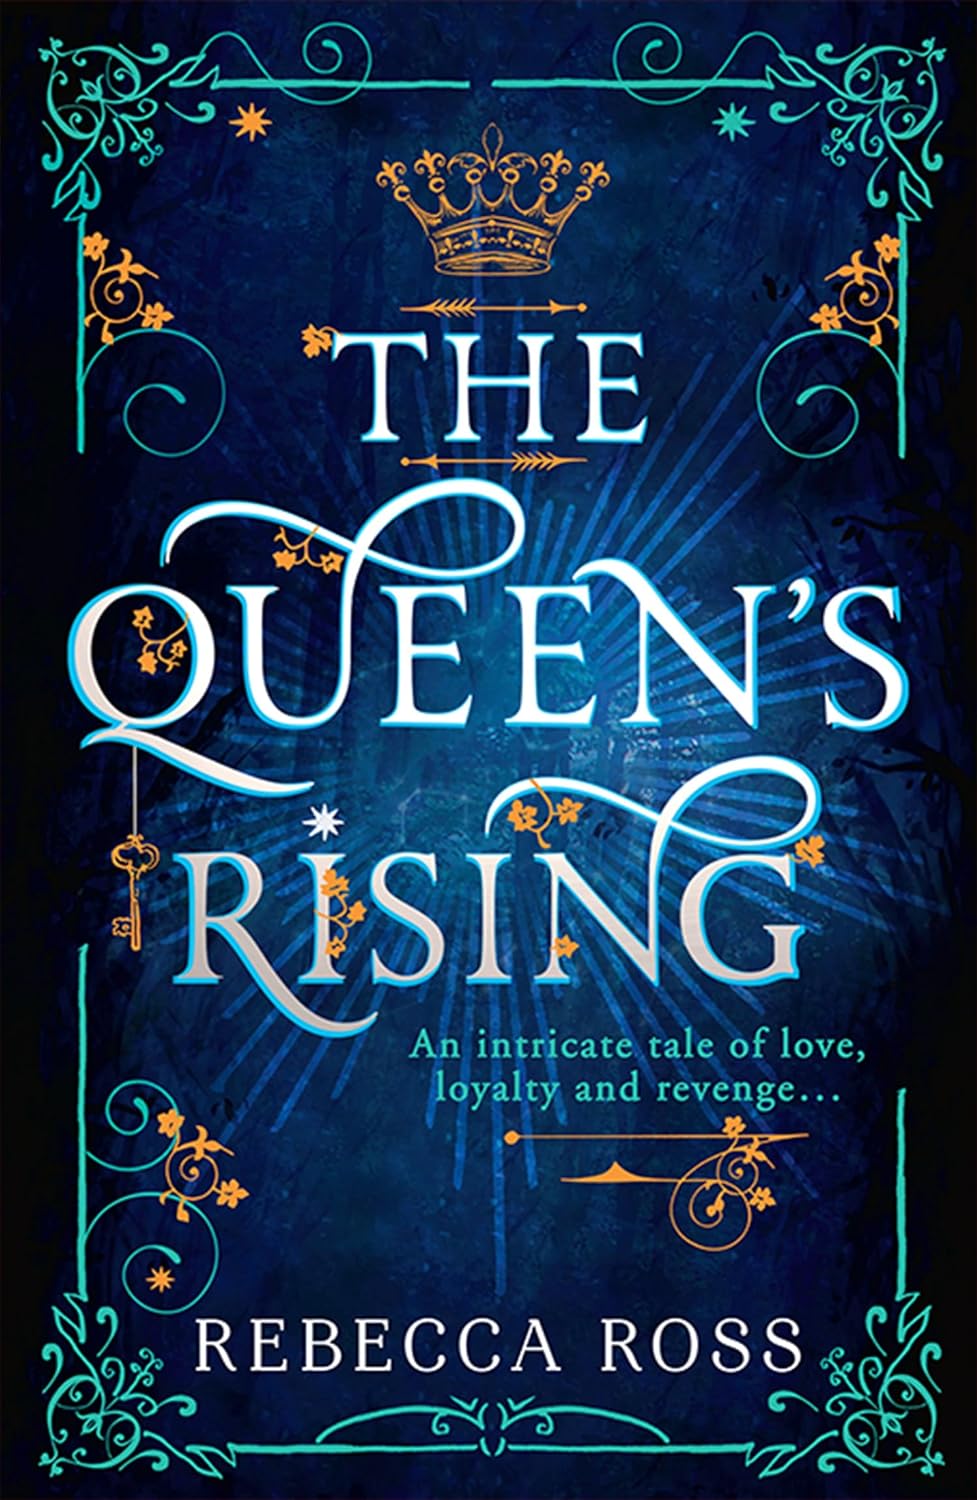 The Queen’s Rising by Rebecca Ross